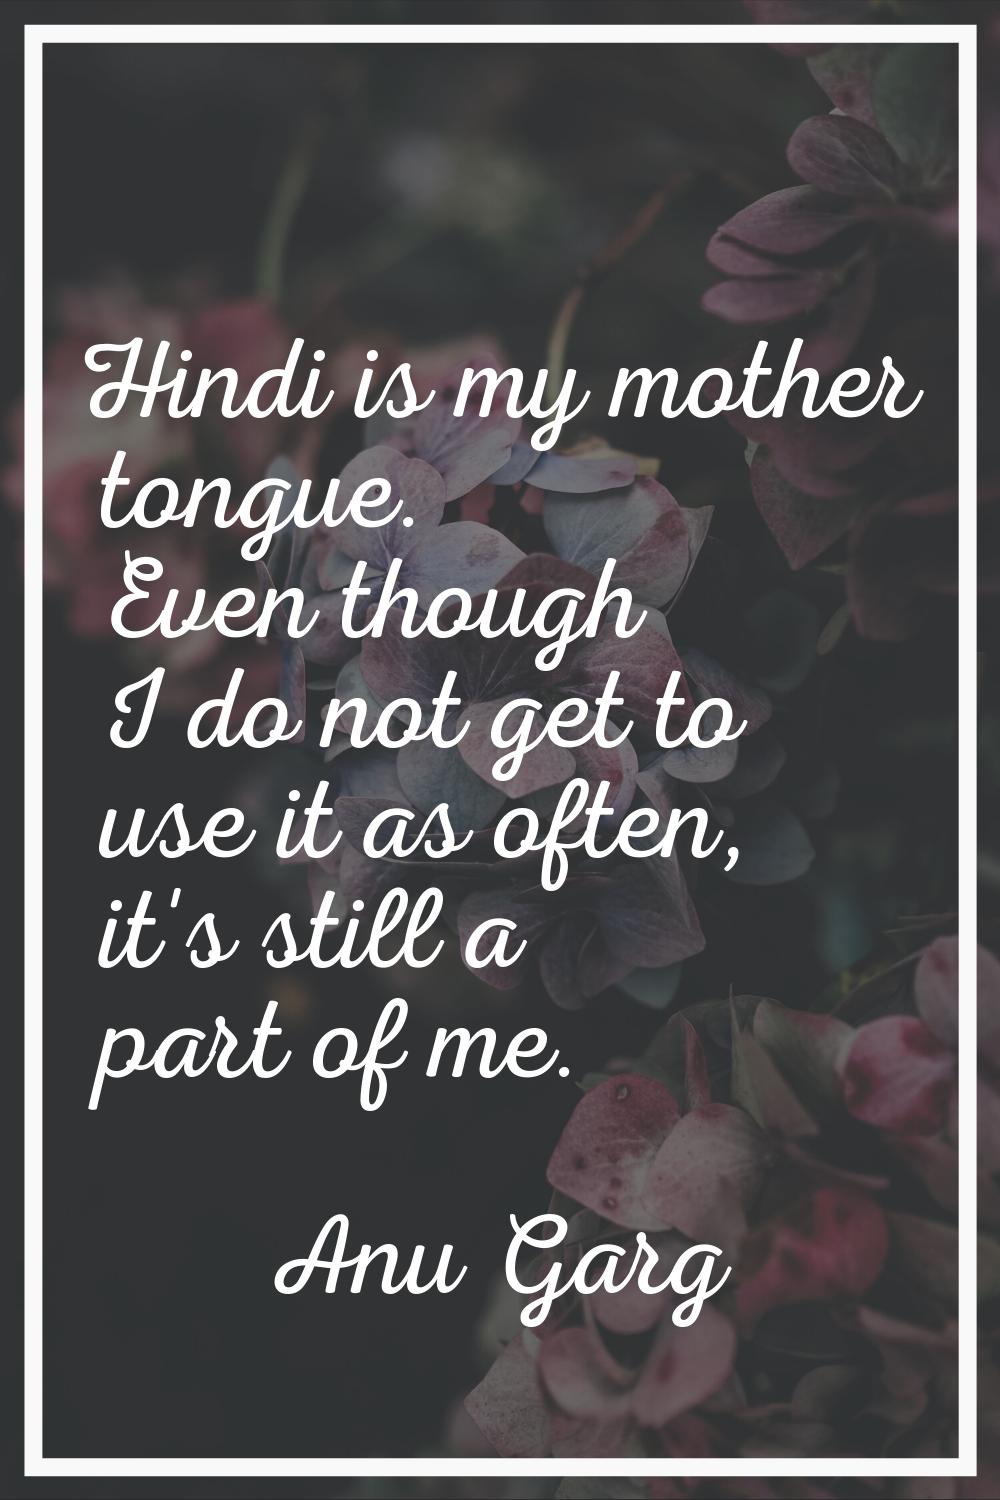 Hindi is my mother tongue. Even though I do not get to use it as often, it's still a part of me.